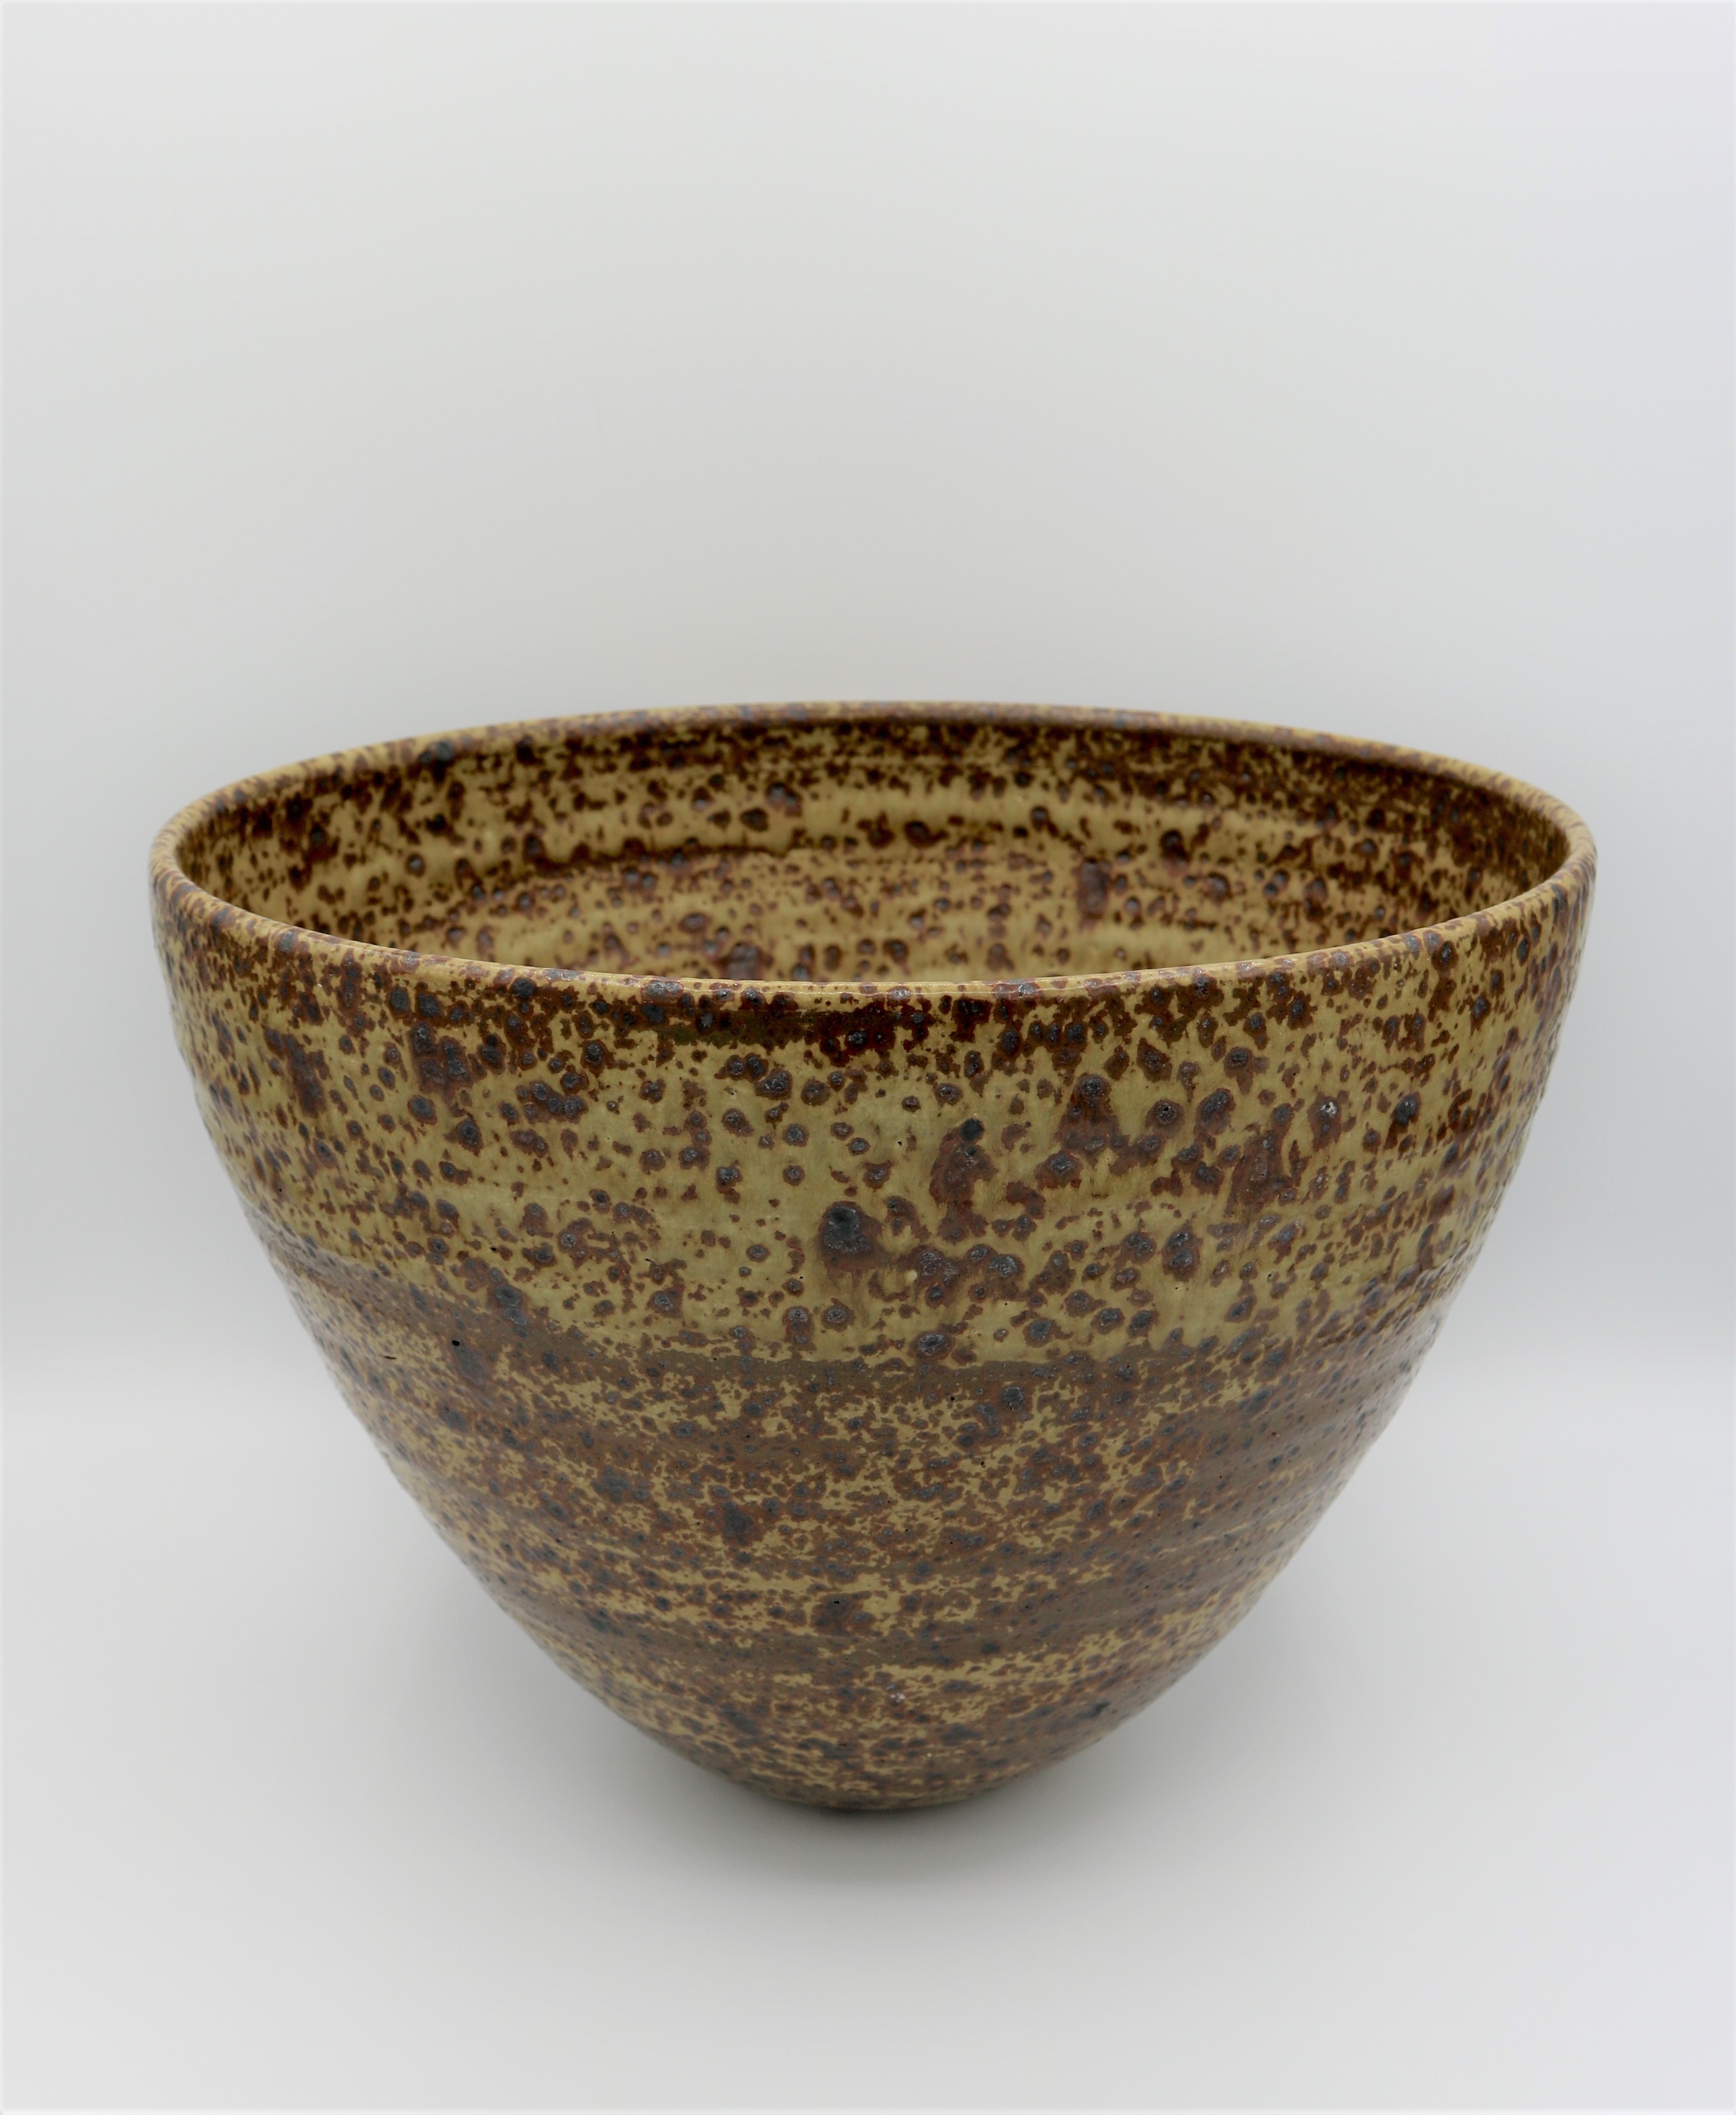 Joanna Constantinidis  32. a magnificent large early bowl